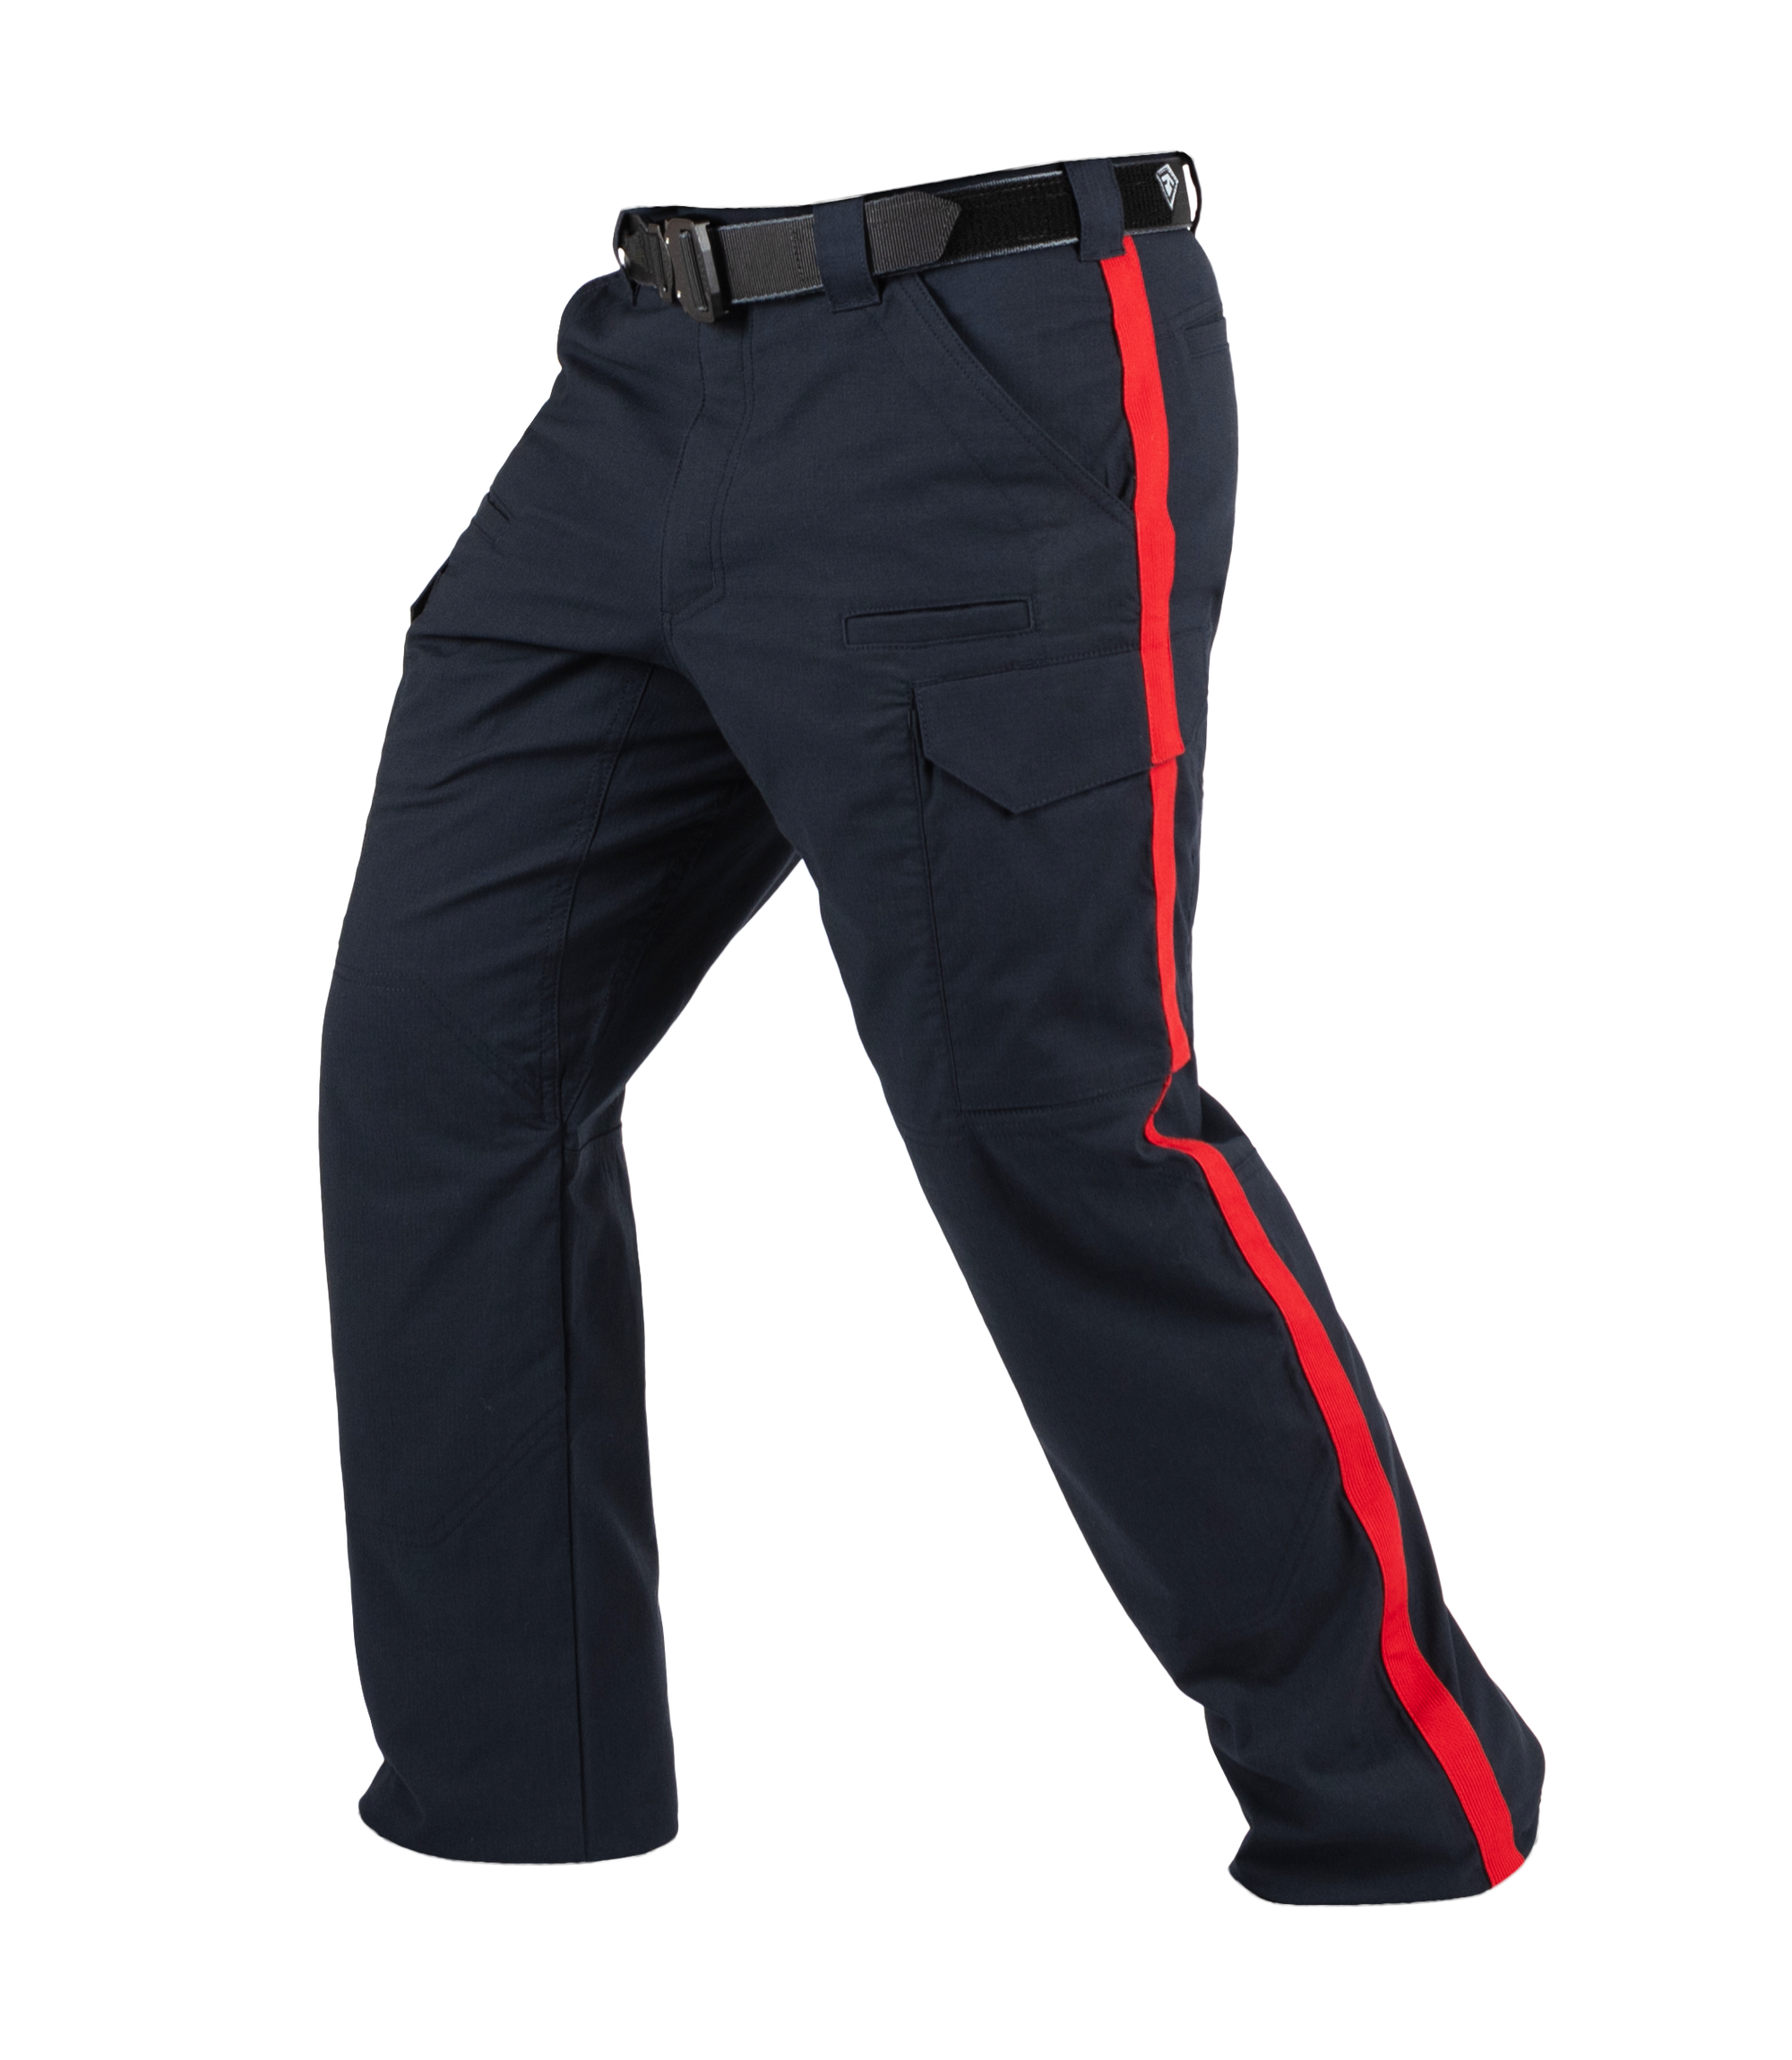 First Tactical Men's V2 Tactical Pant - 1/2" Red Stripe - Midnight Navy